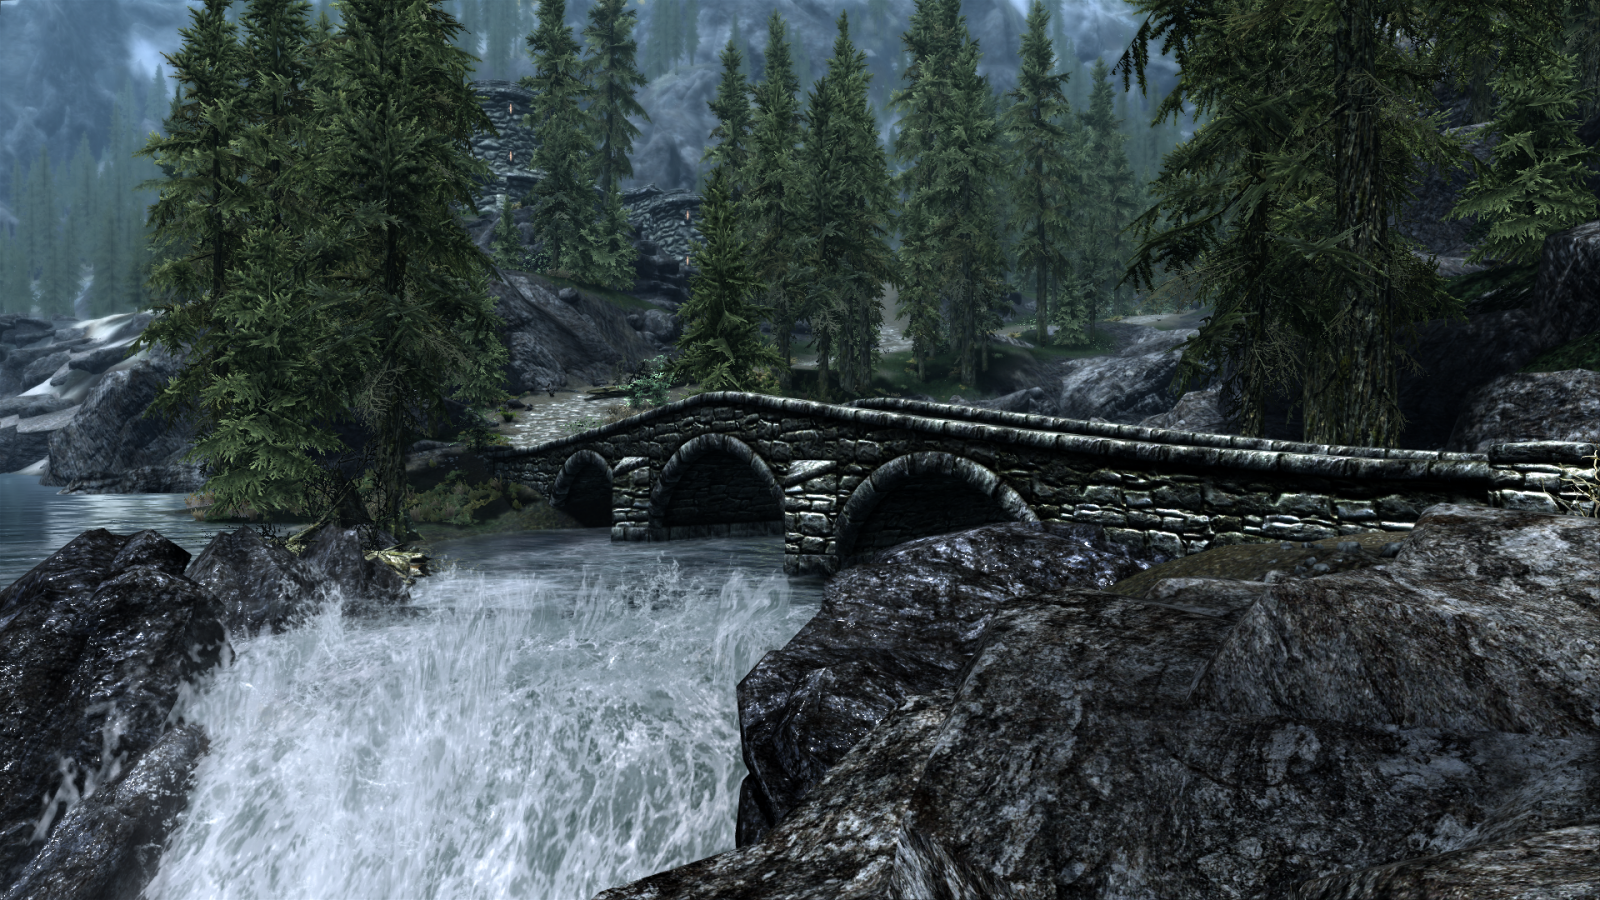 So... I started playing Skyrim again :)